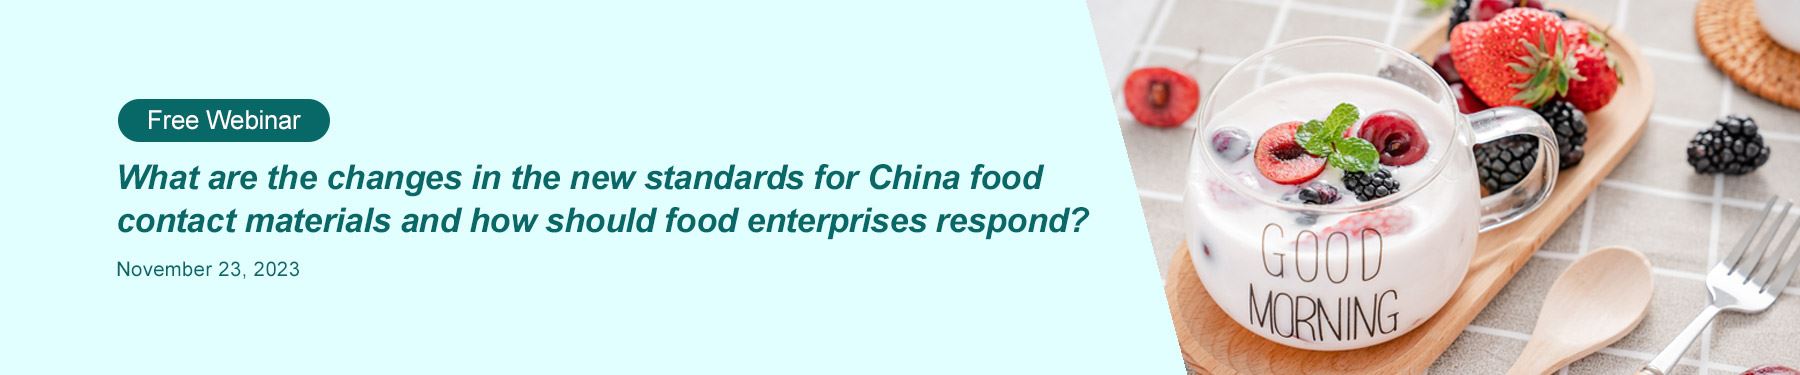 https://m.hfoushi.com/en/food/cirs-free-webinar-what-are-the-changes-in-the-new-standards-for-china-food-contact-materials-and-how-should-food-enterprises-respond